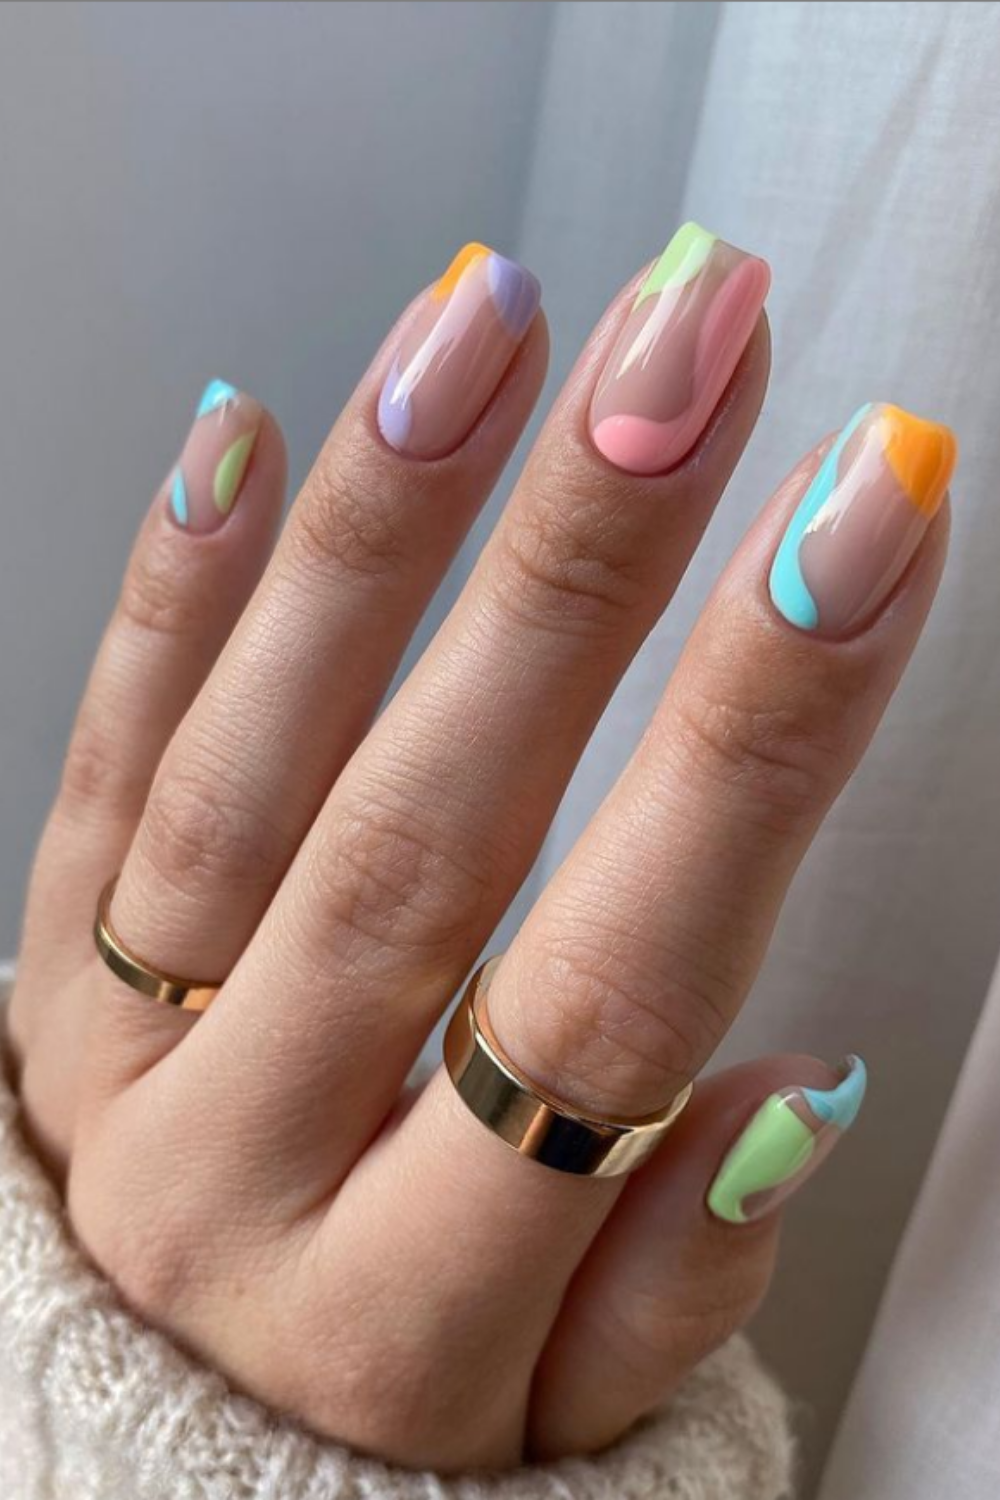 Short Acrylic Nails Art with Coffin Shape for Autumn 2021